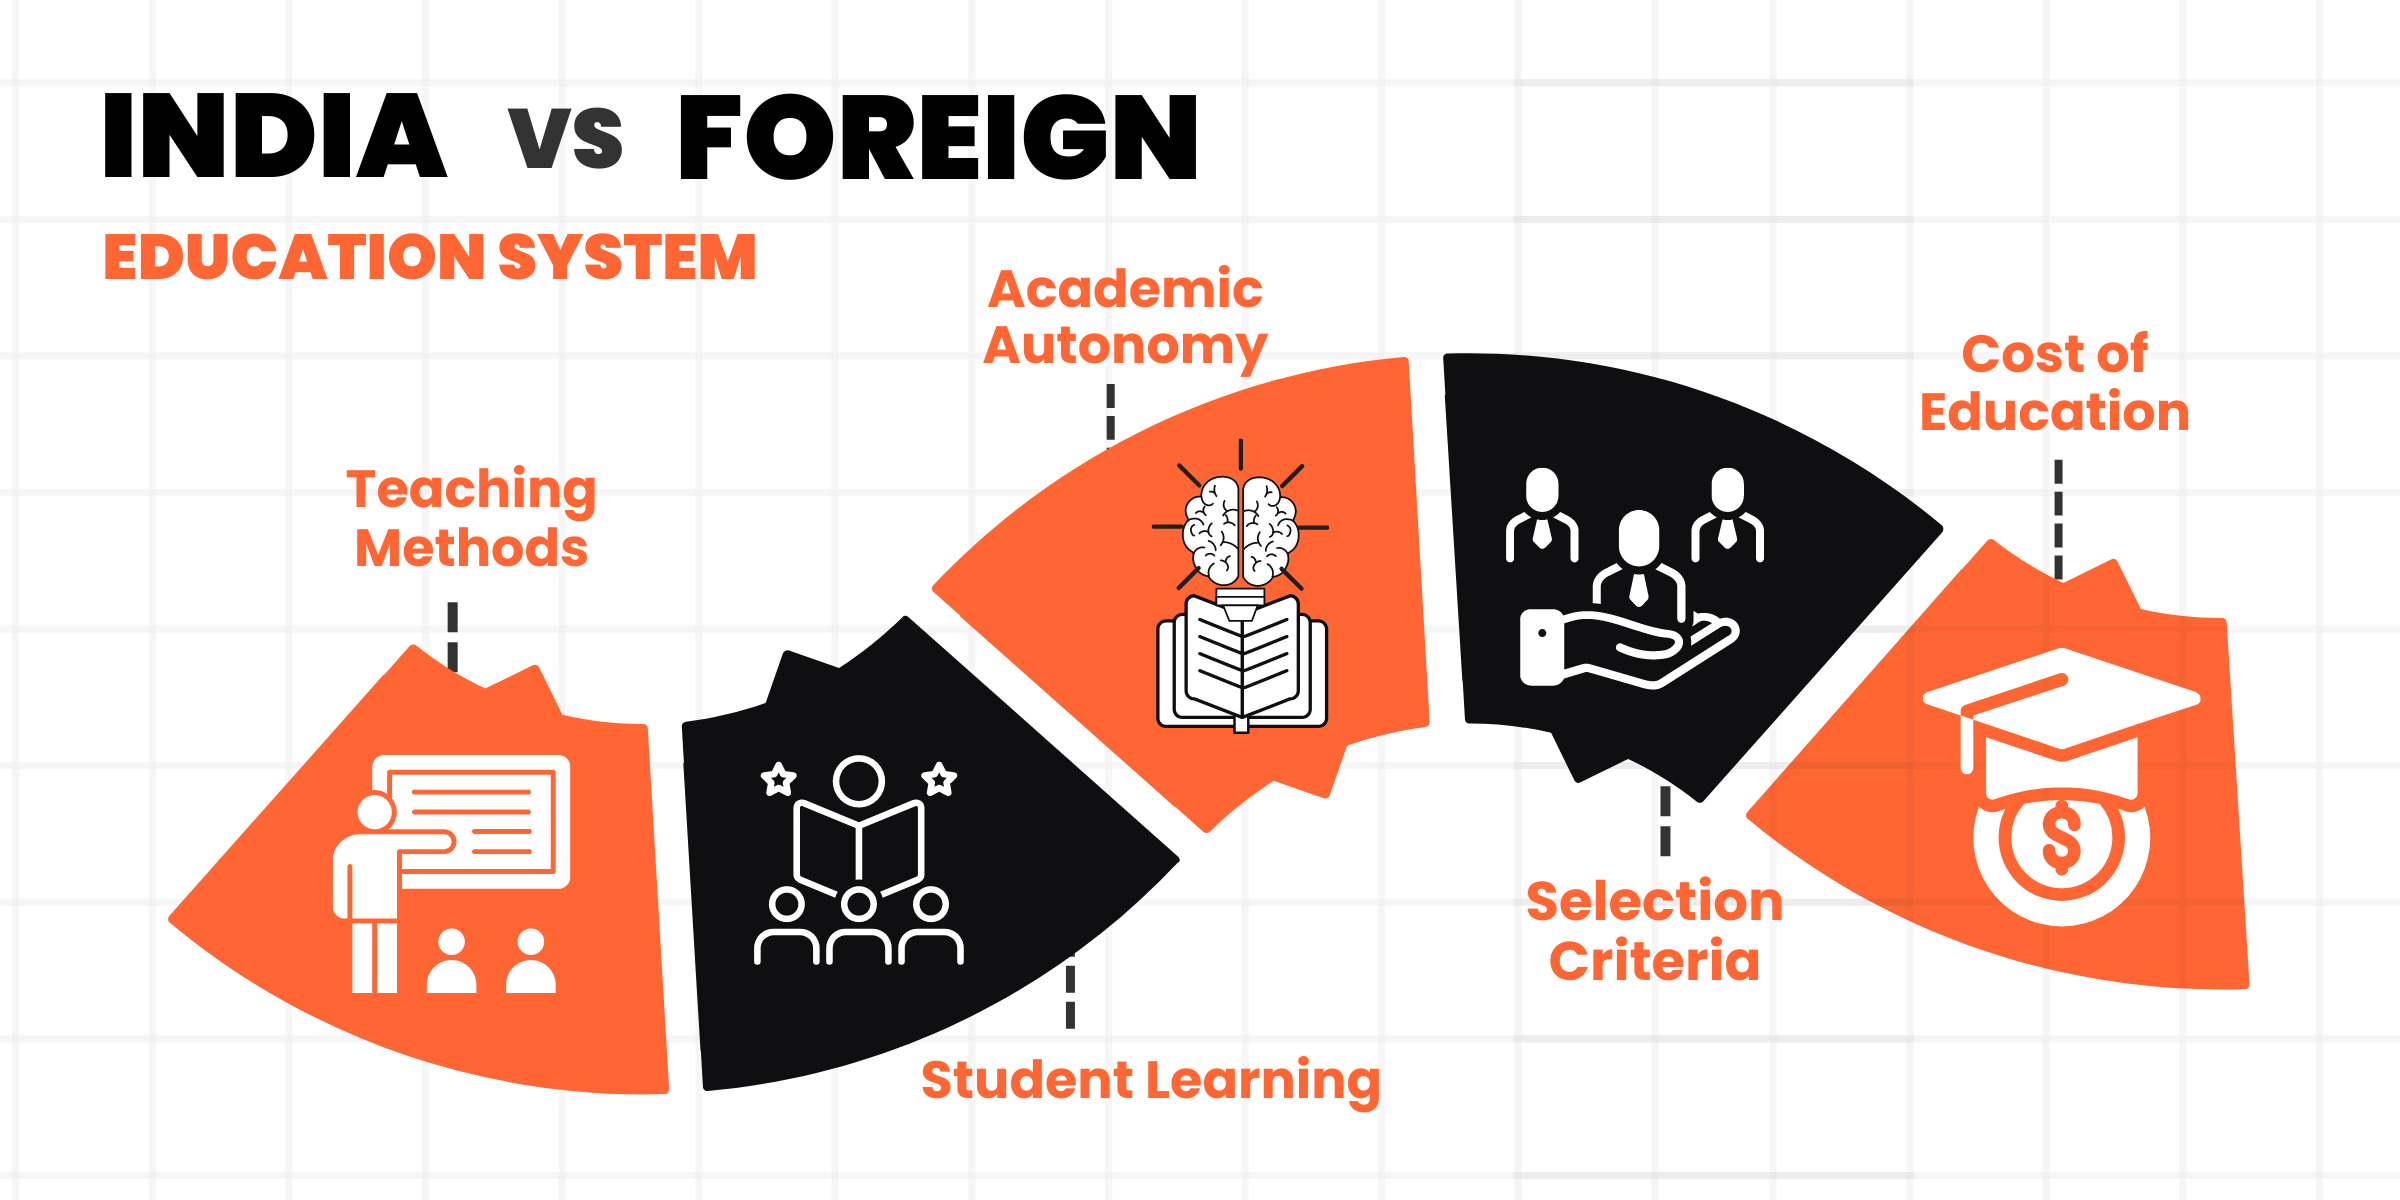 Indian education system versus foreign education